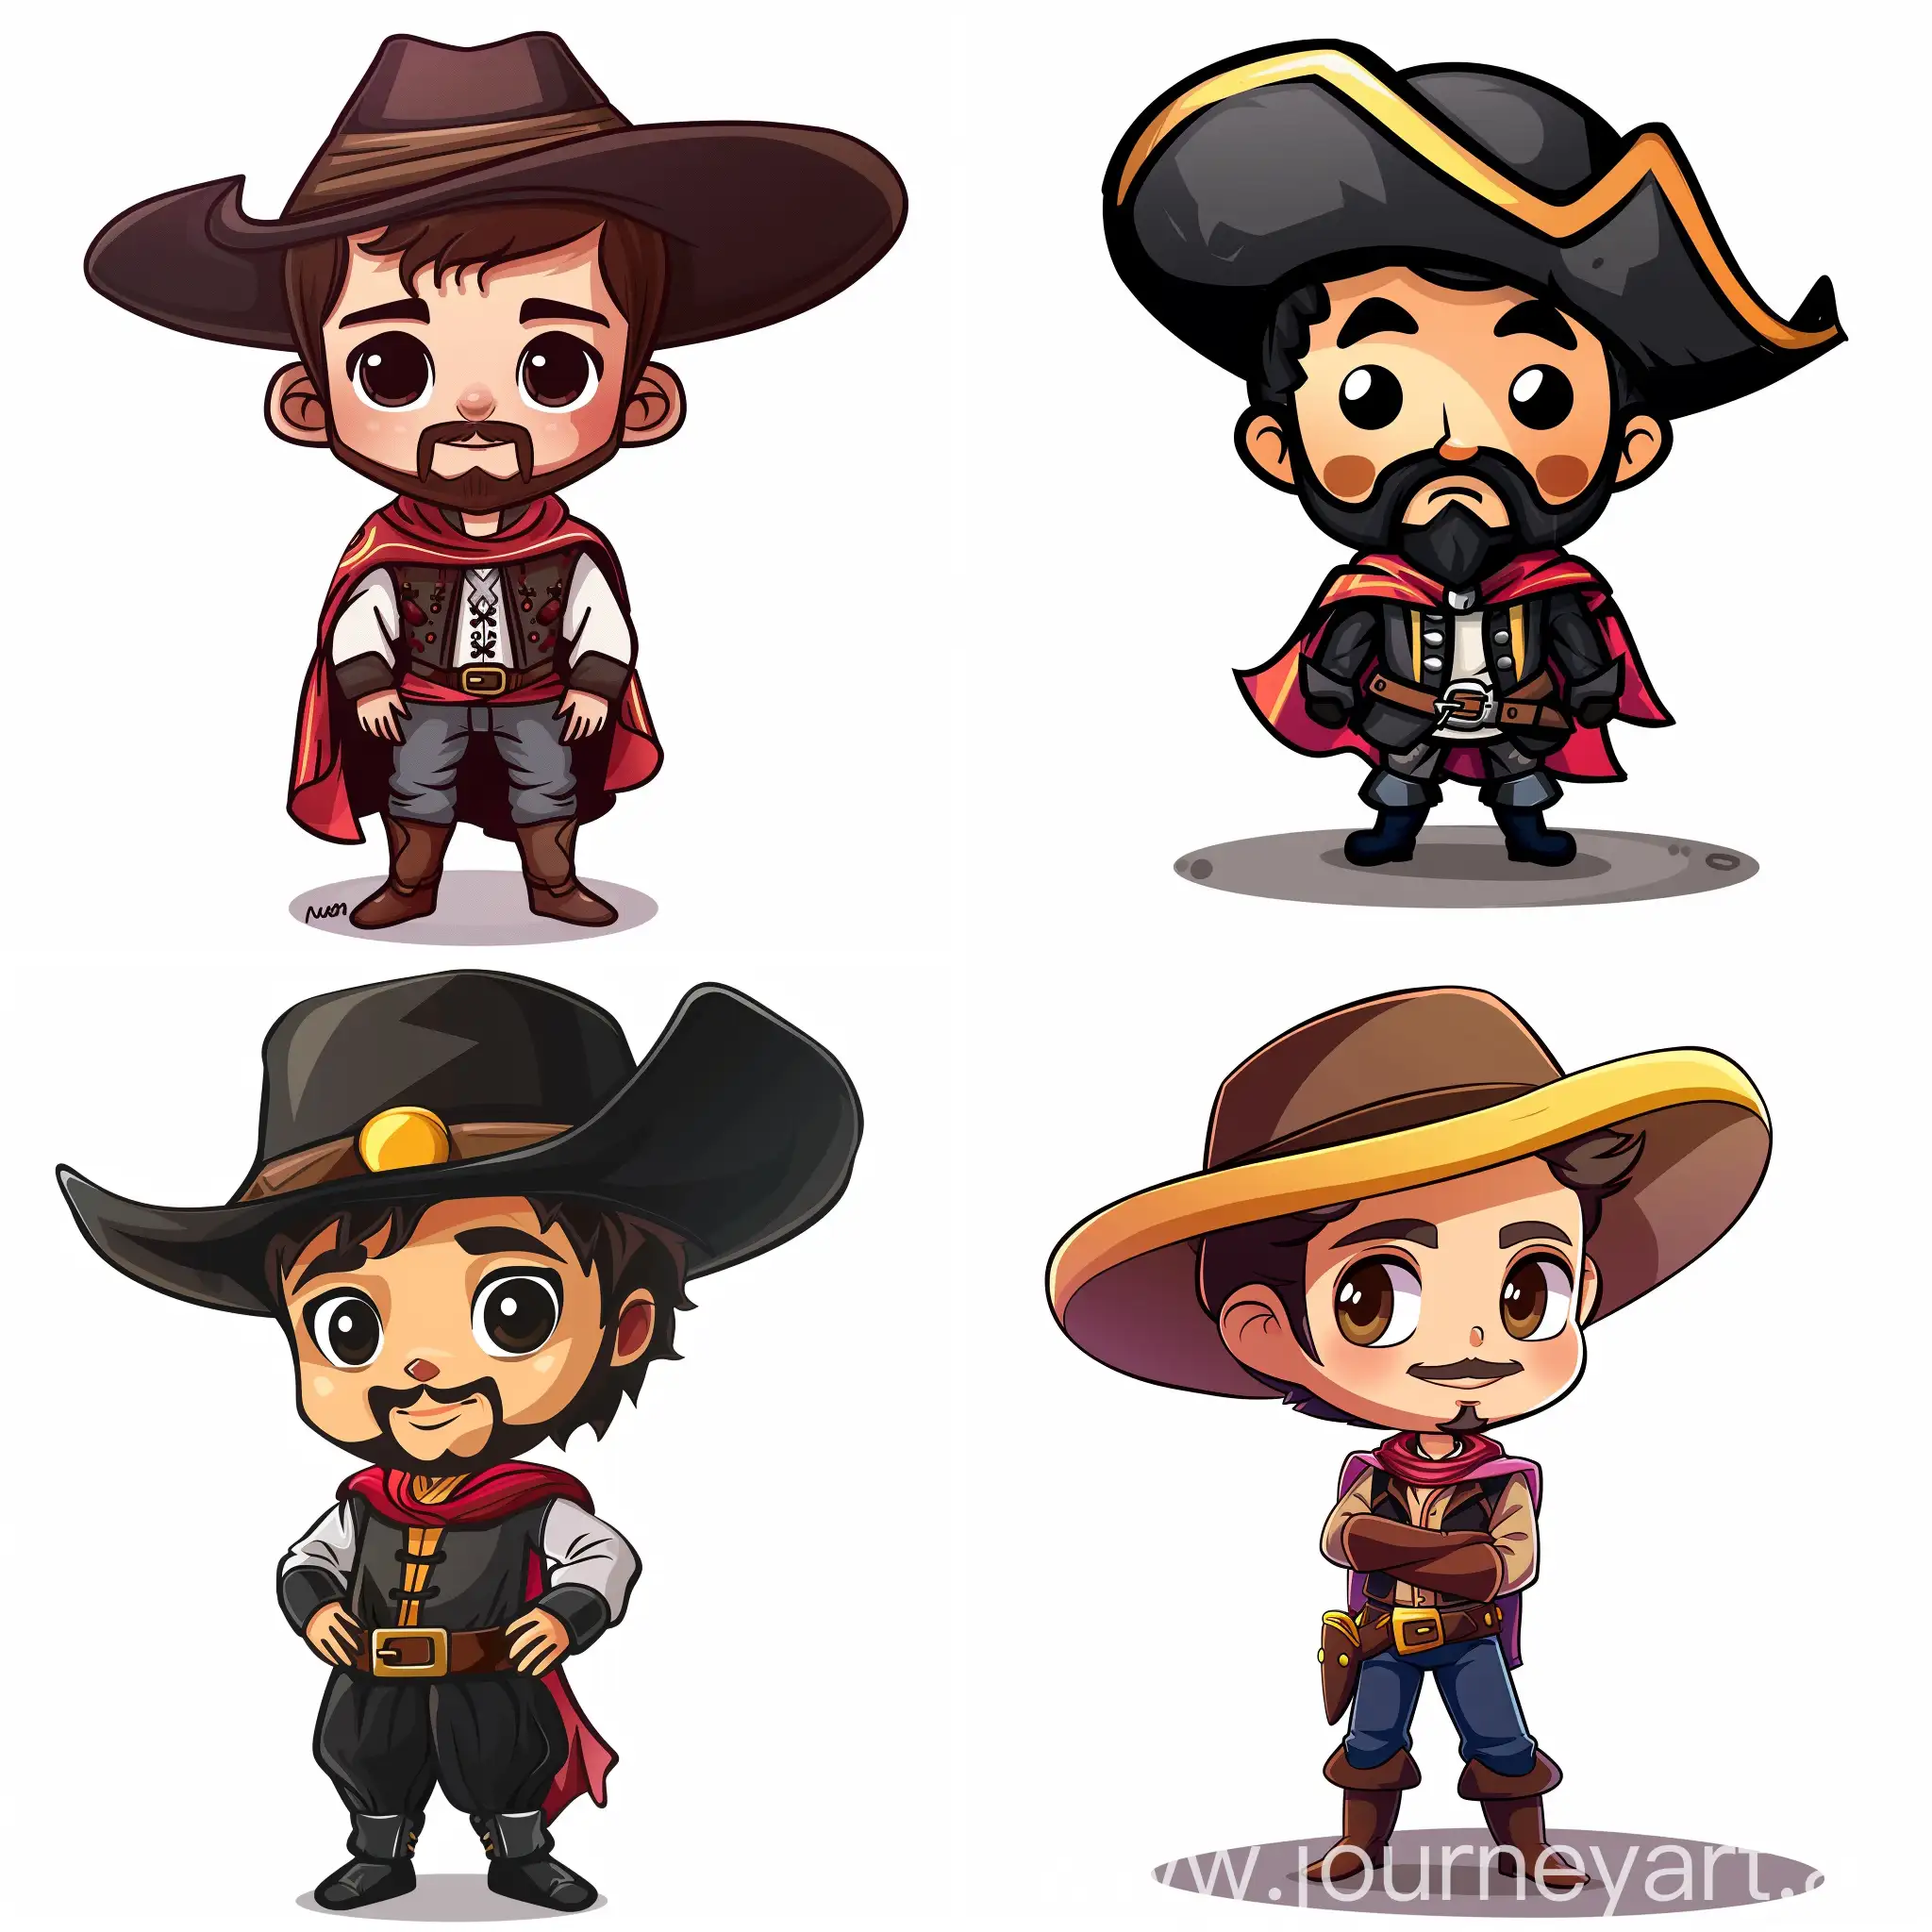 Adorable-Chibi-Style-Cartoon-of-a-Spanish-Character